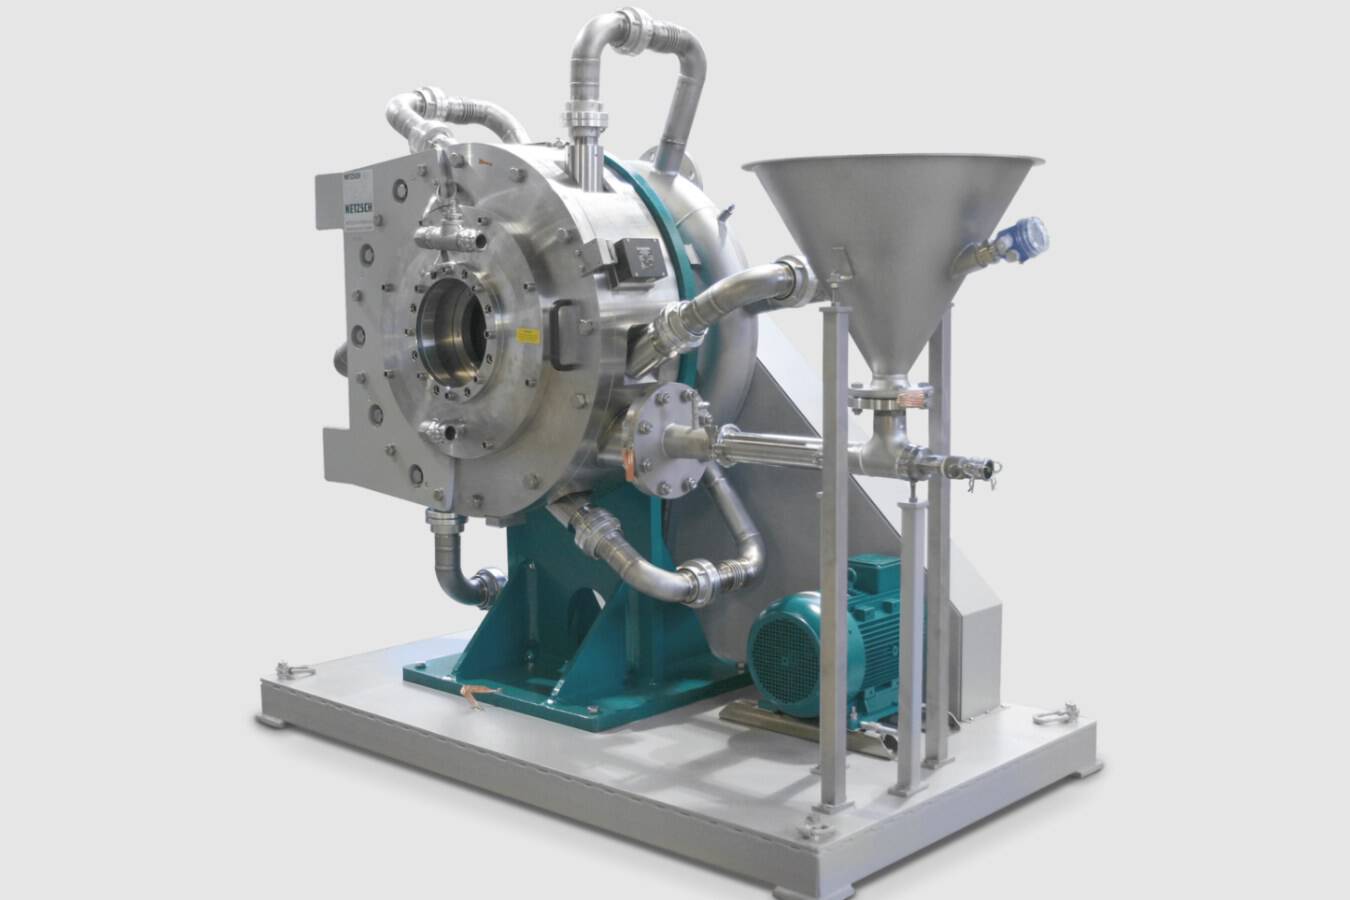 NETZSCH ConJet: air jet milling with controlled maximum particle size NETZSCH High-Density Bed Jet Mill ConJet: the combination of a spiral jet mill with an integrated classifier wheel makes it possible to manufacture products reproducibly and with a steep particle size distribution.